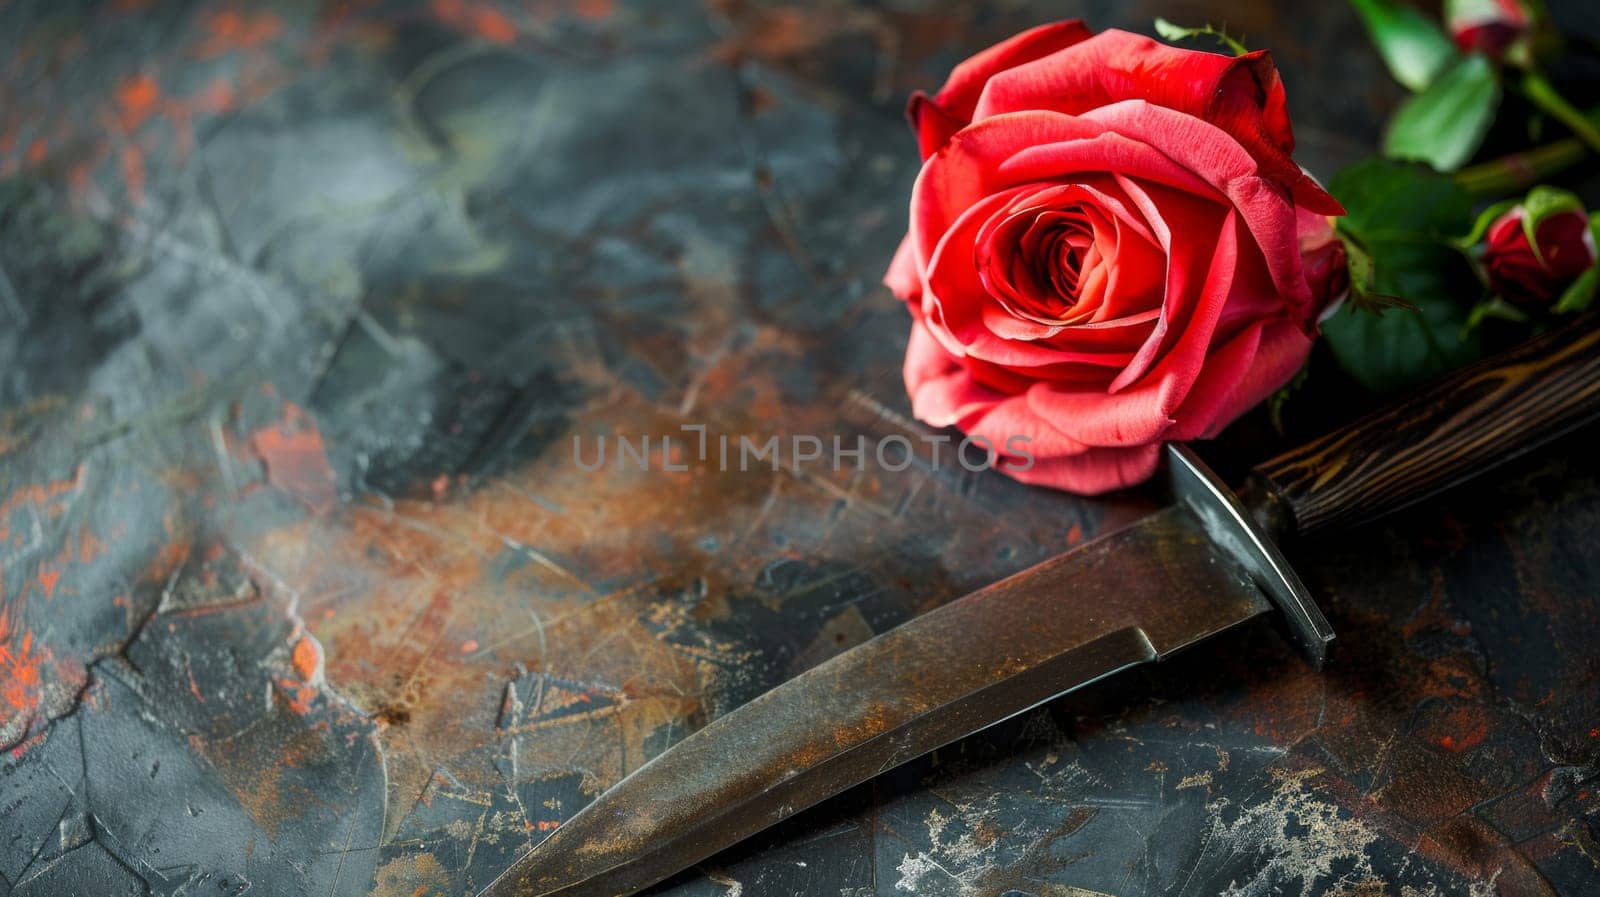 A knife and a rose on the table with some dirt